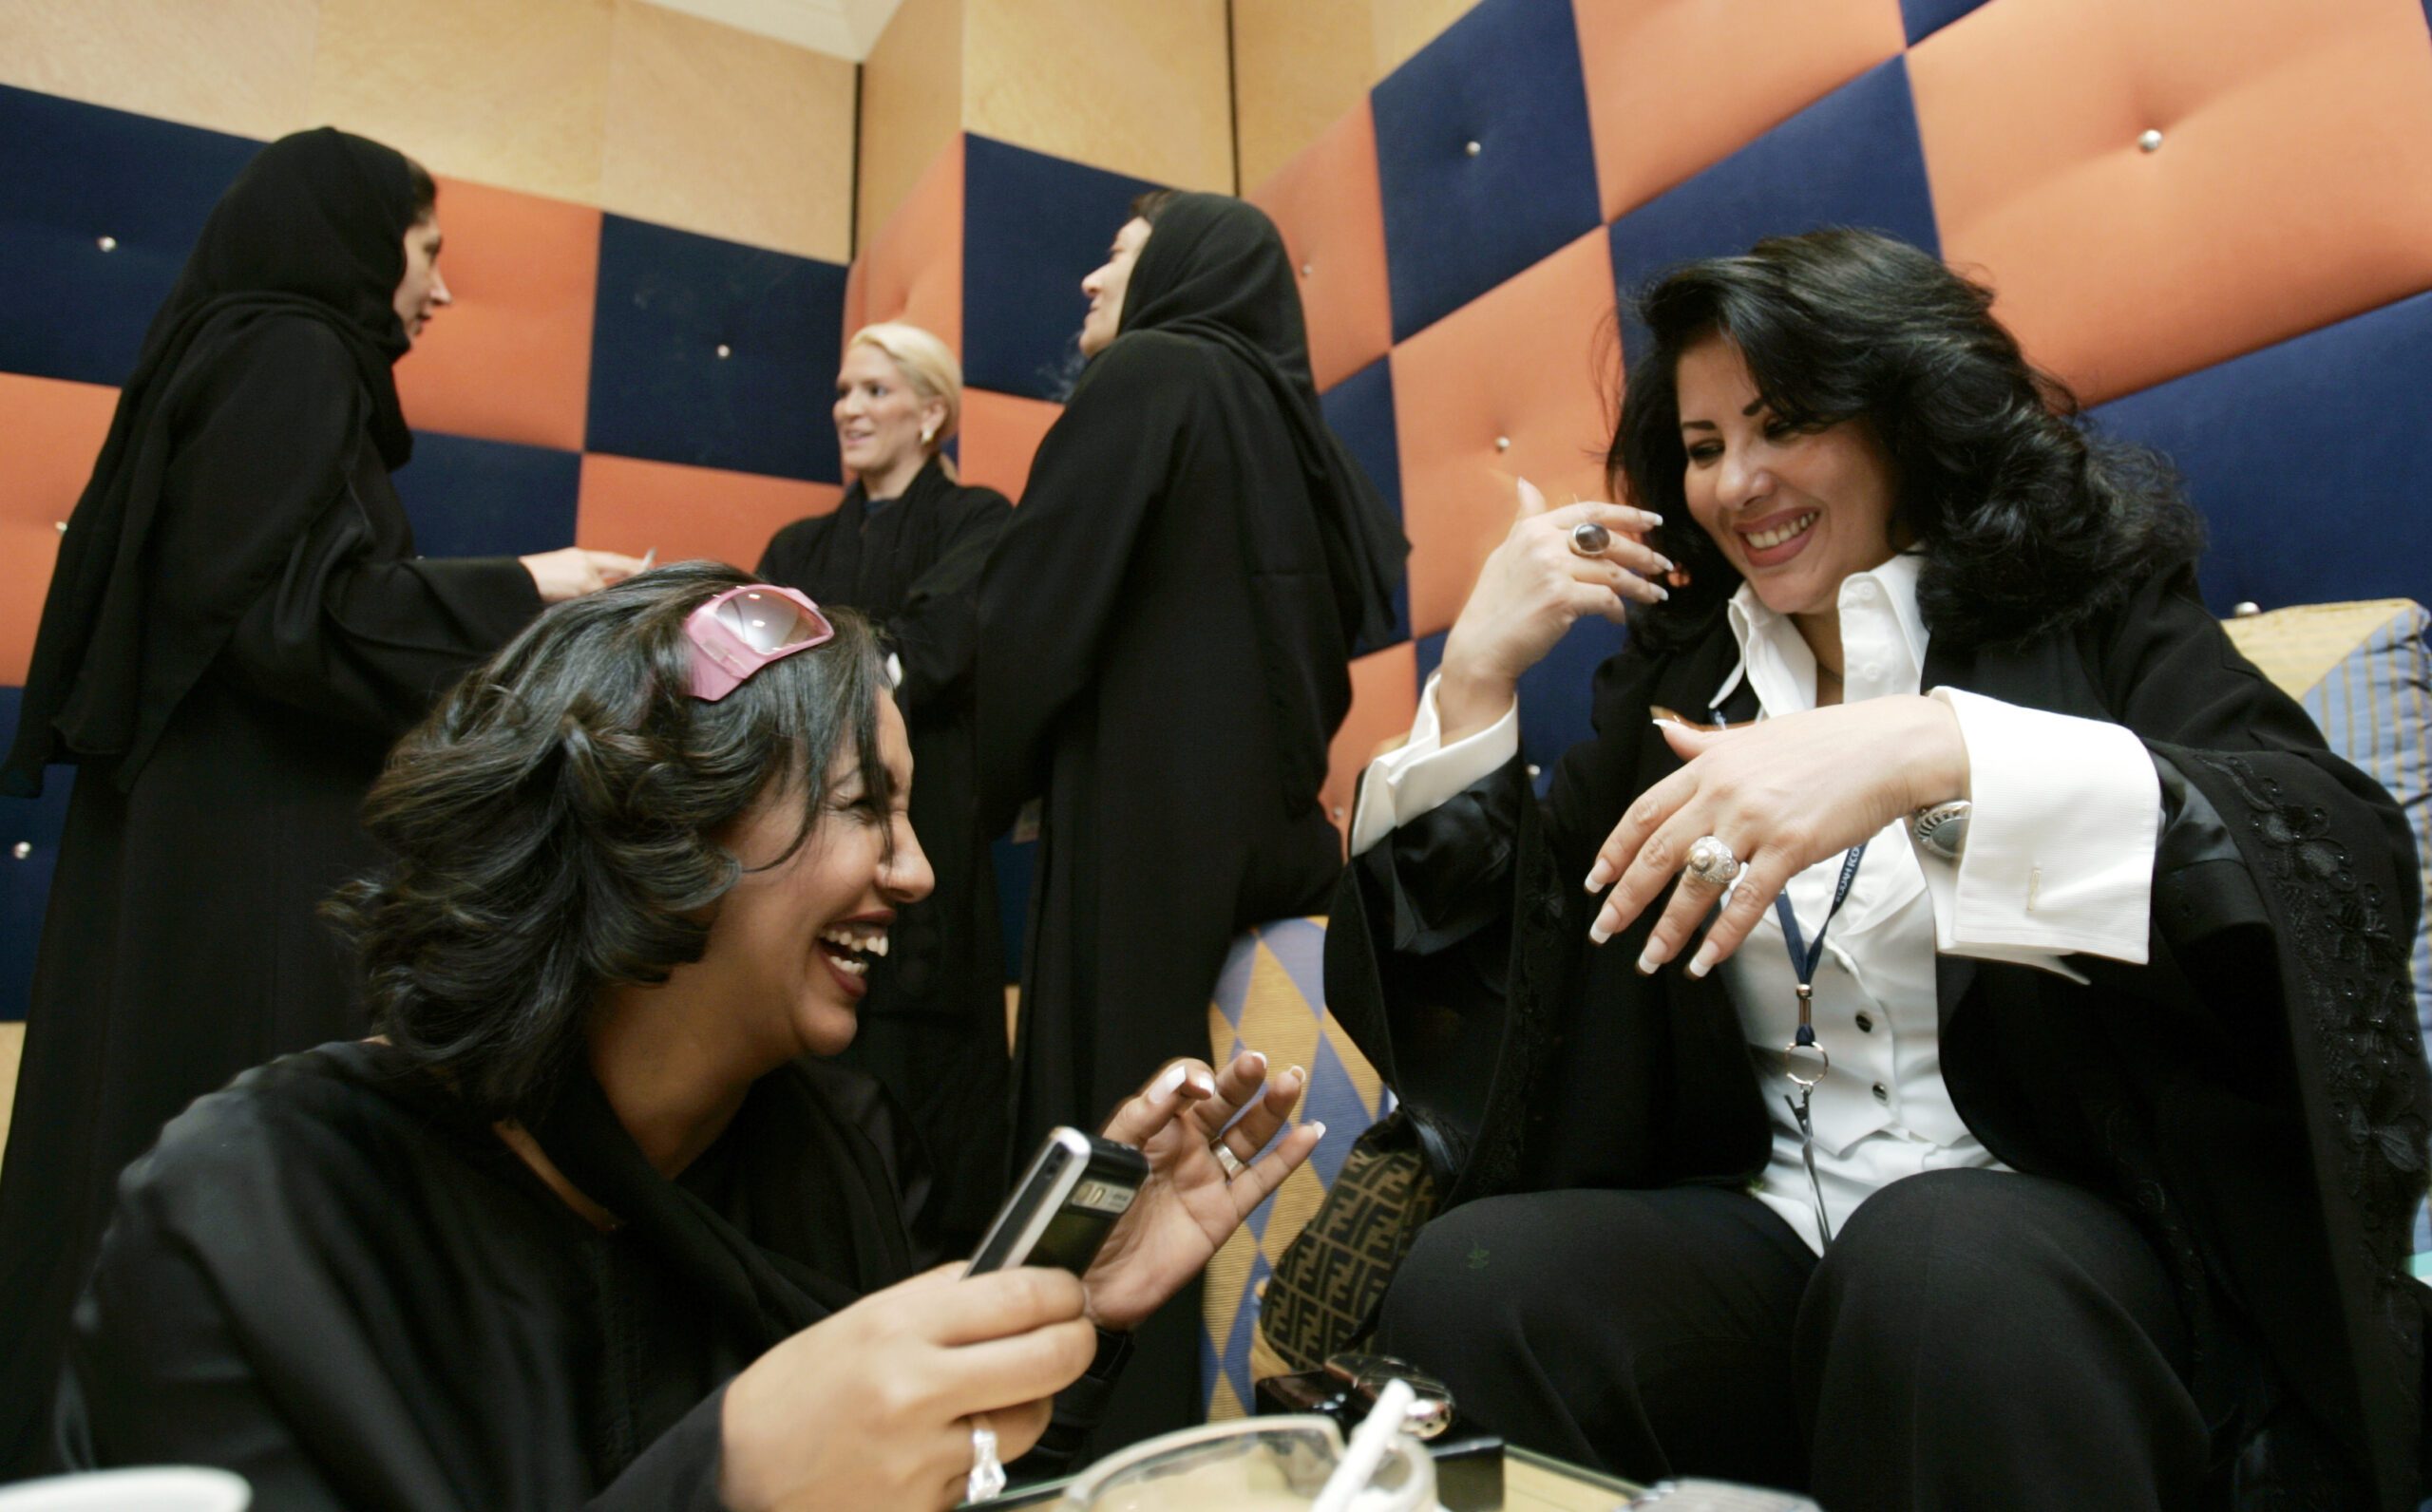 Saudi profiessional women having a conversation and laughing